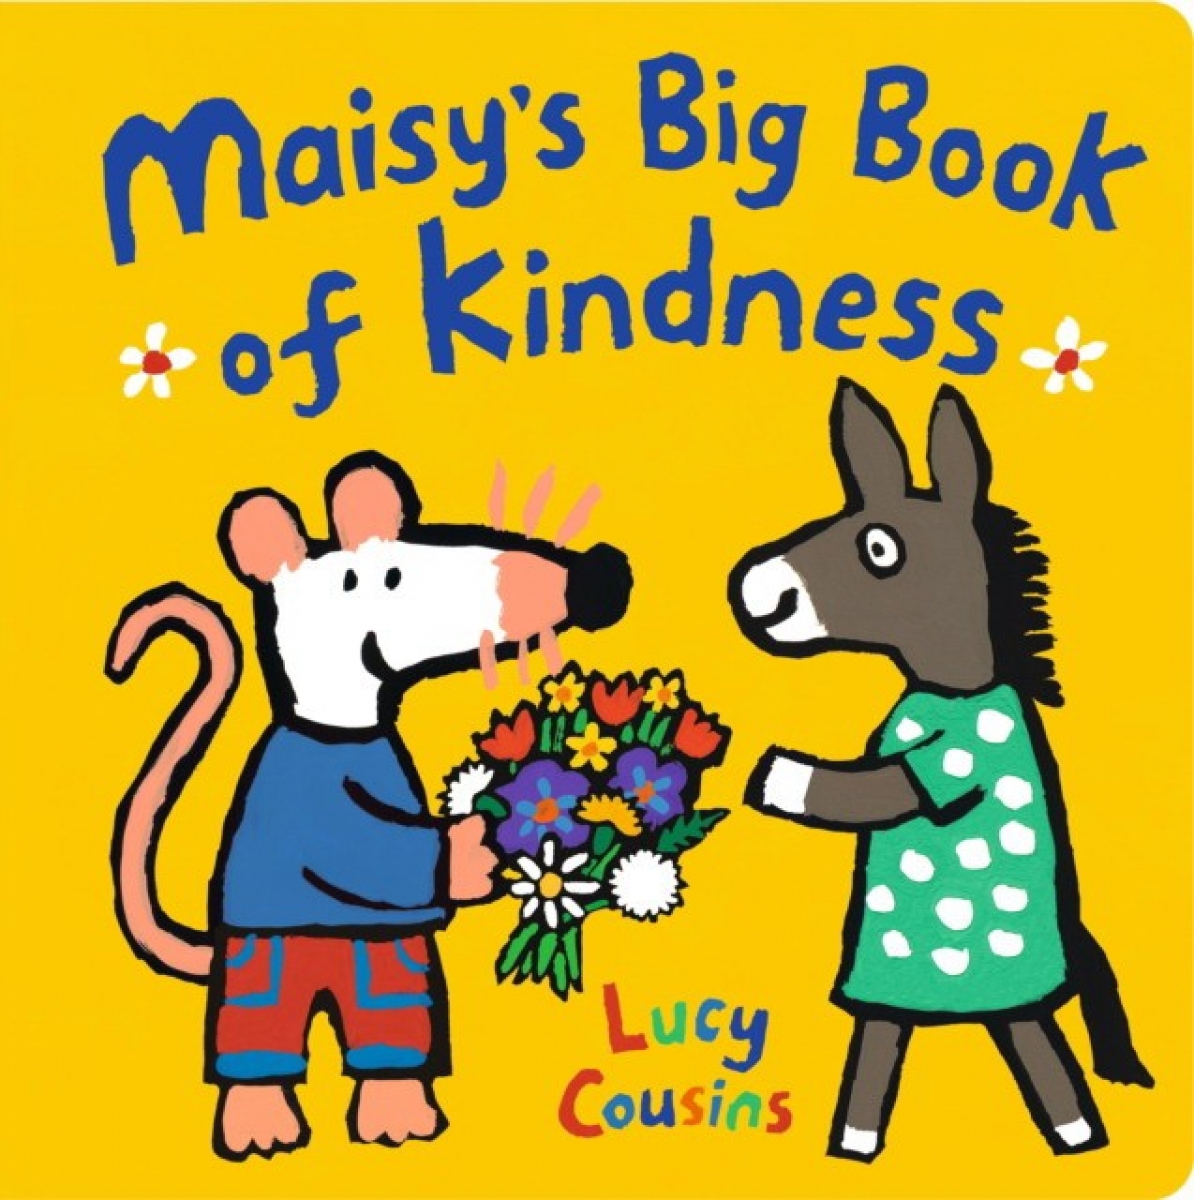 Cousins Lucy Maisy's big book of kindness 